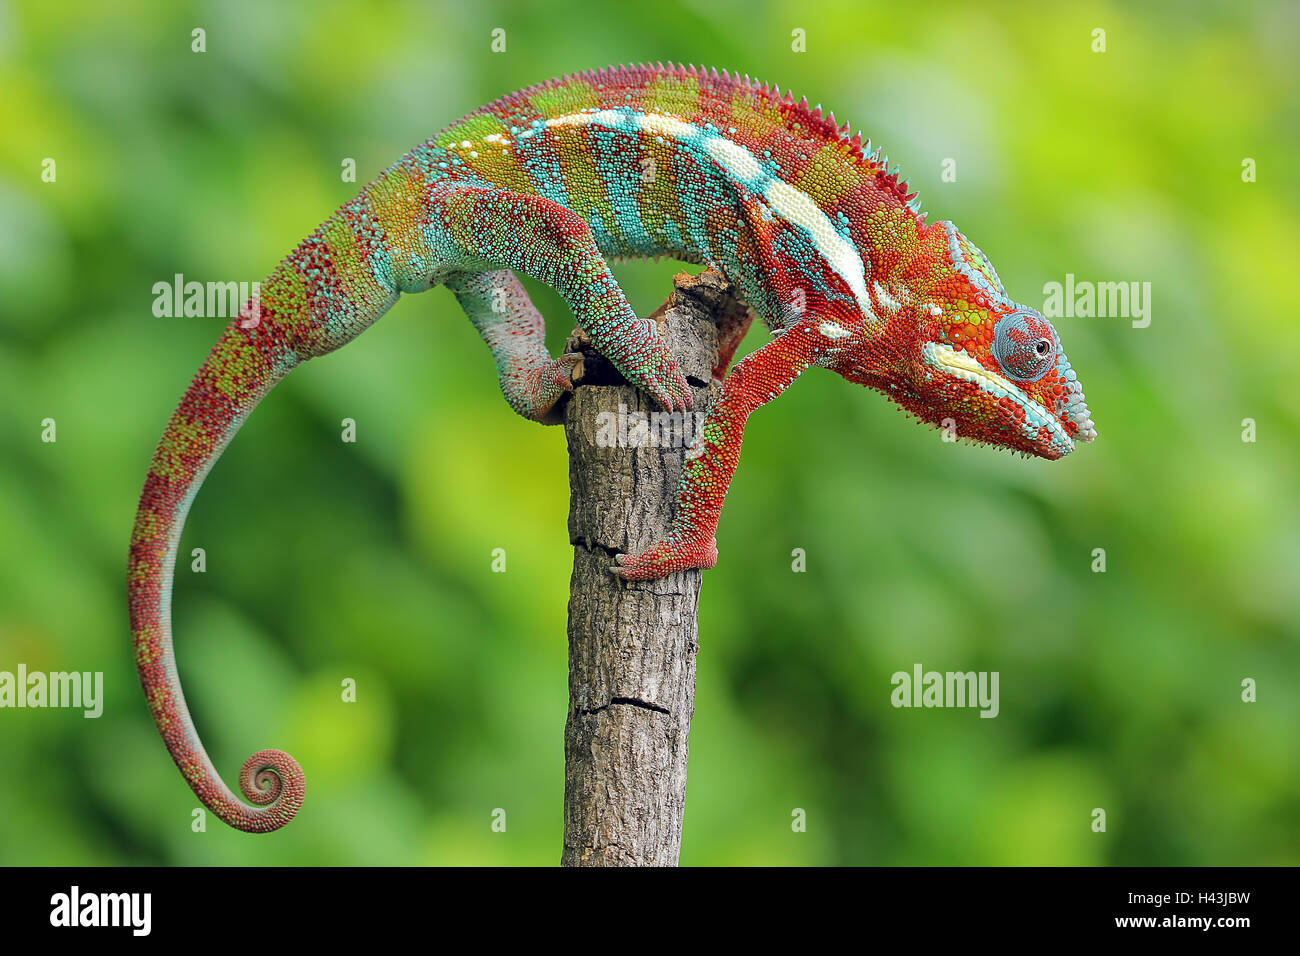 Portrait of a Panther chameleon on a branch, Indonesia Stock Photo